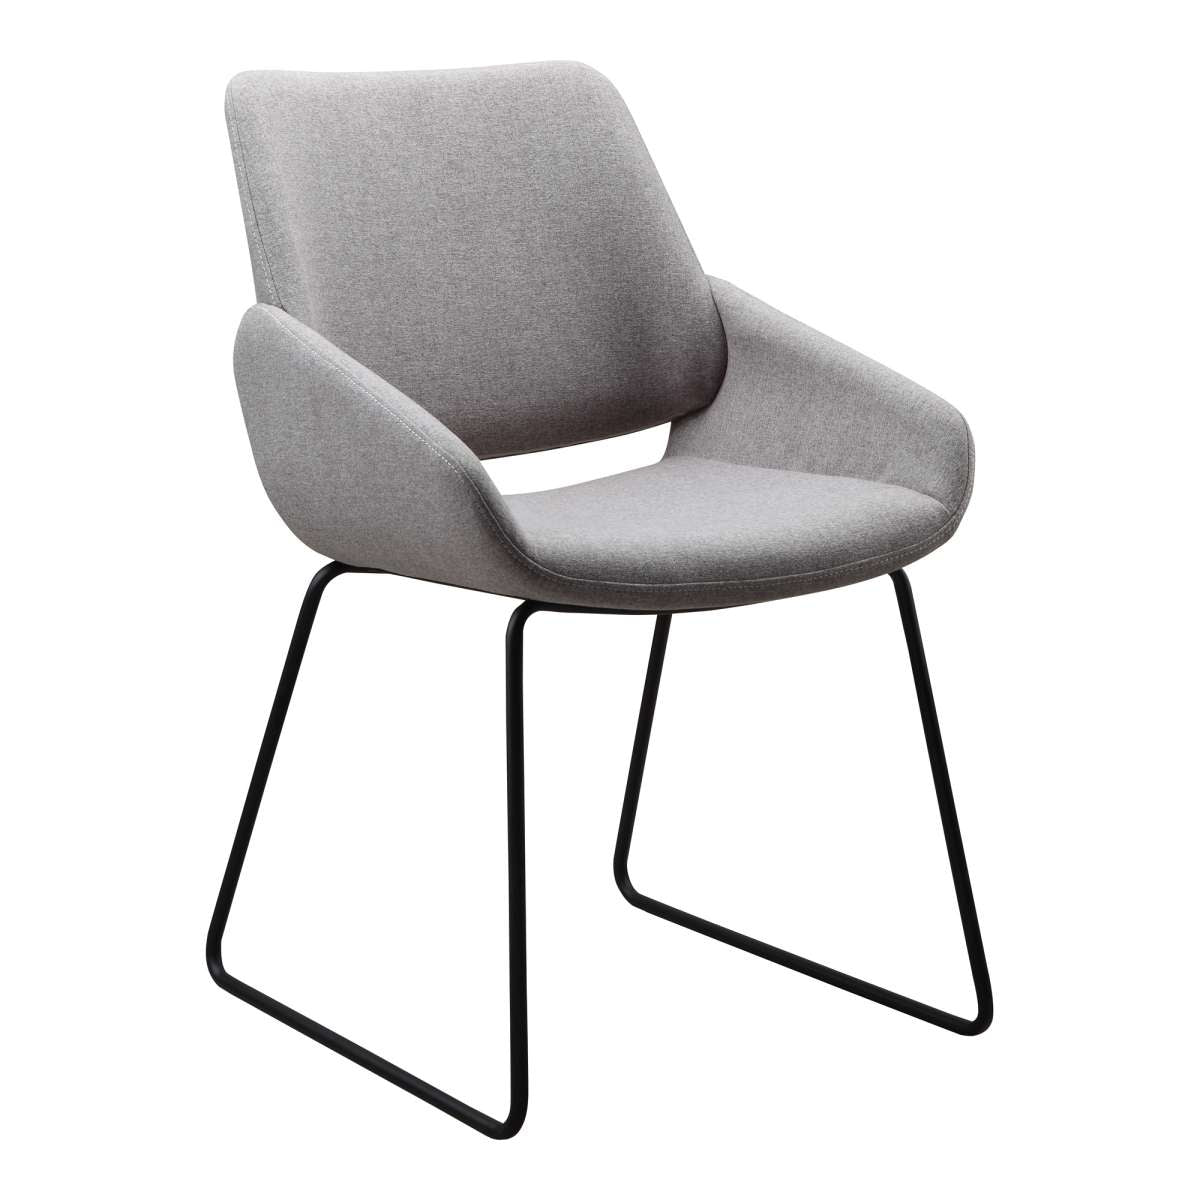 Lisboa Dining Chair By Moe's Home Collection